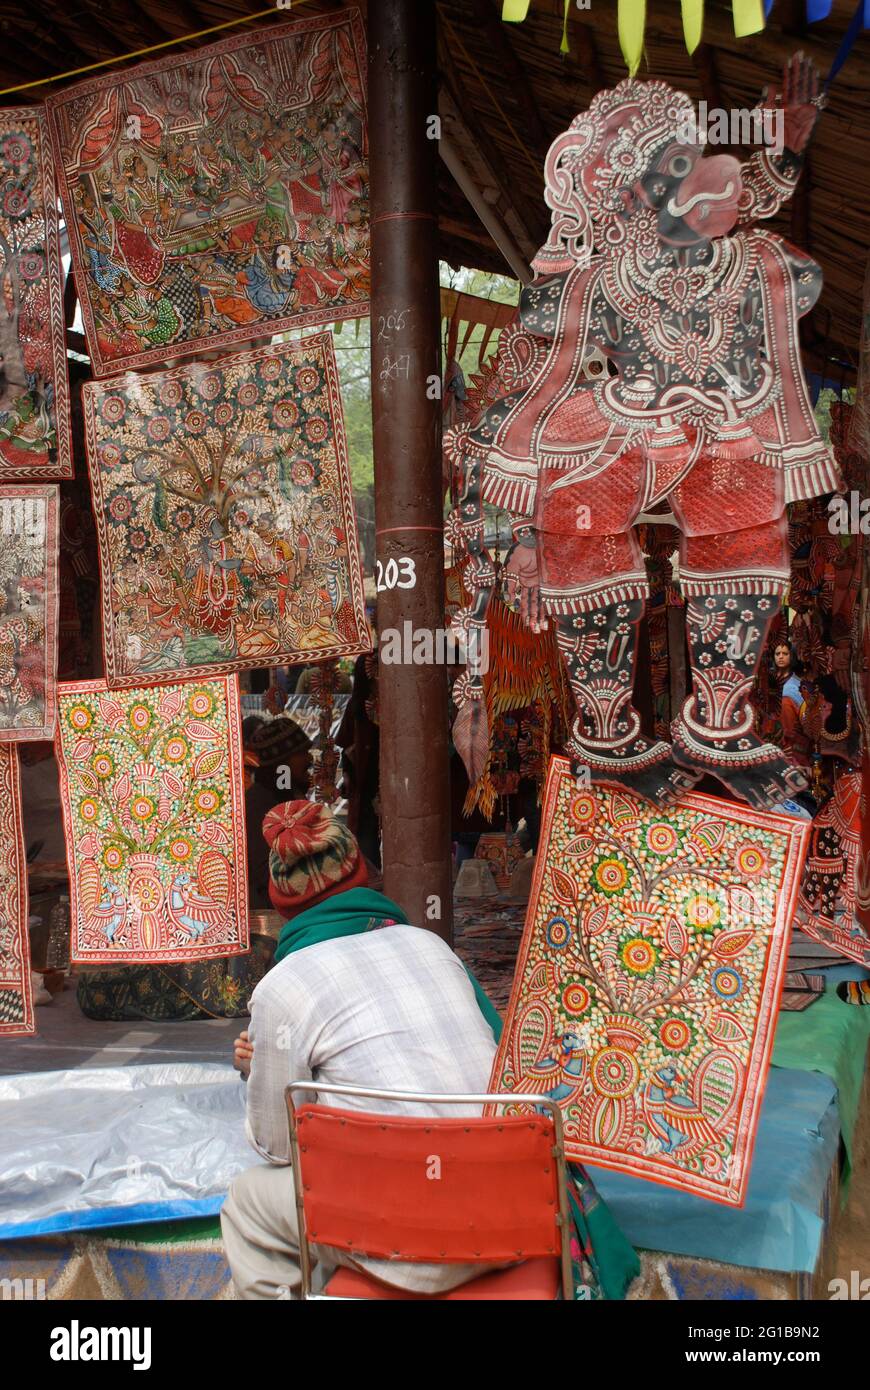 A craftsman from Andhra Pradesh waits for customers at his stall, at the annual Surajkund Mela in Delhi, India. The fair showcases arts and crafts from across India. February 22, 2006. Stock Photo